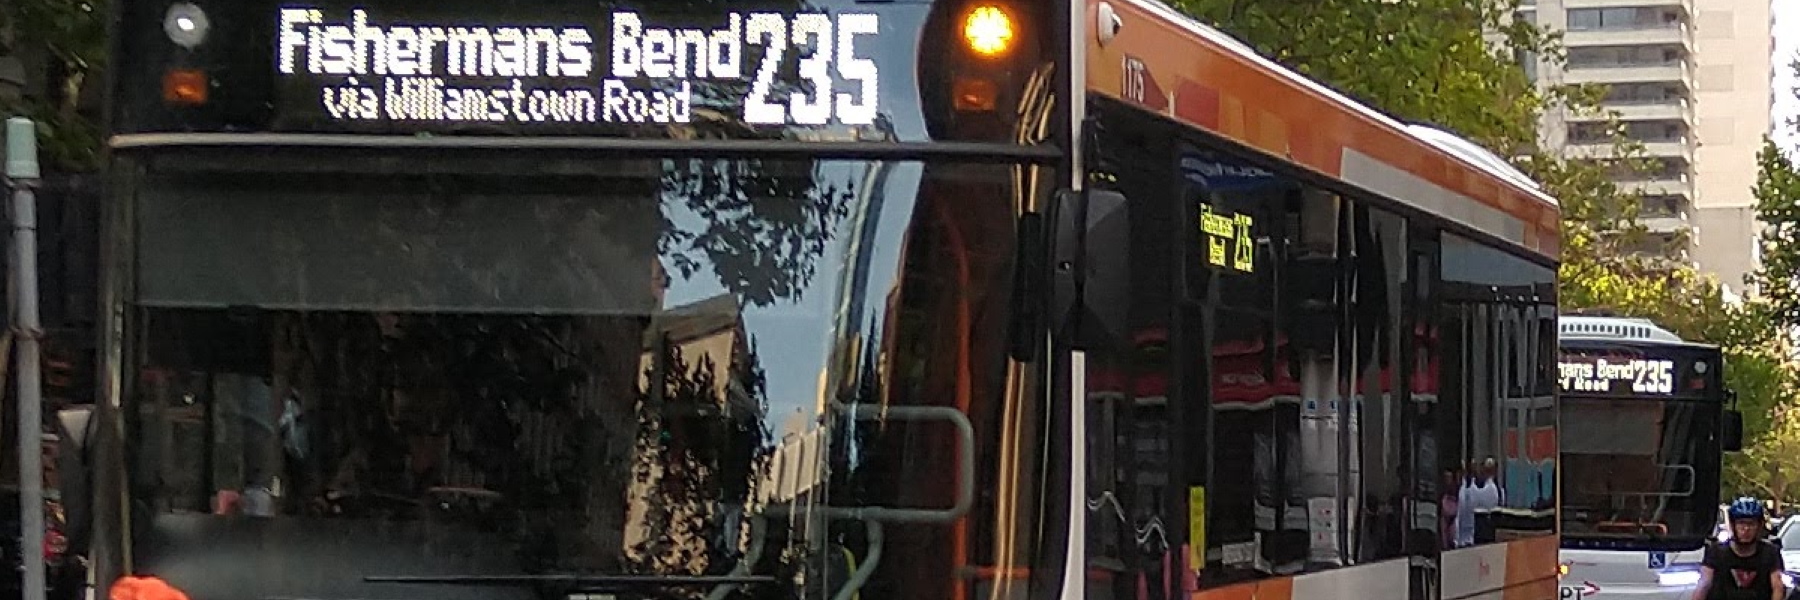 Route 235 buses